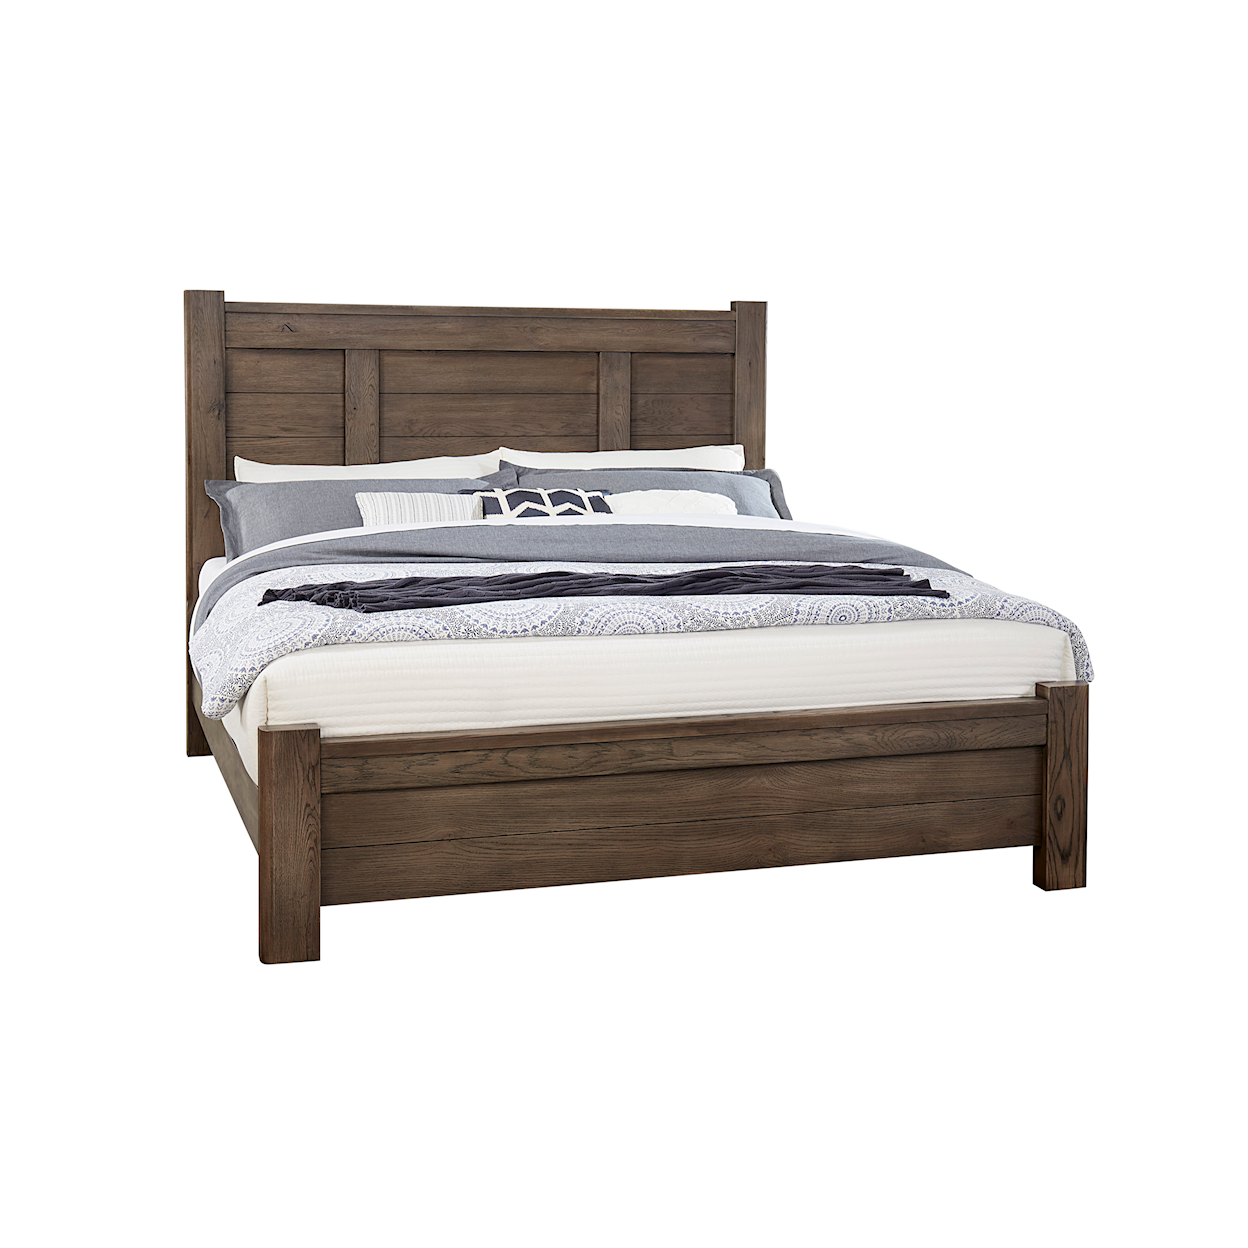 Vaughan Bassett Crafted Oak - Aged Grey California King Poster Bed